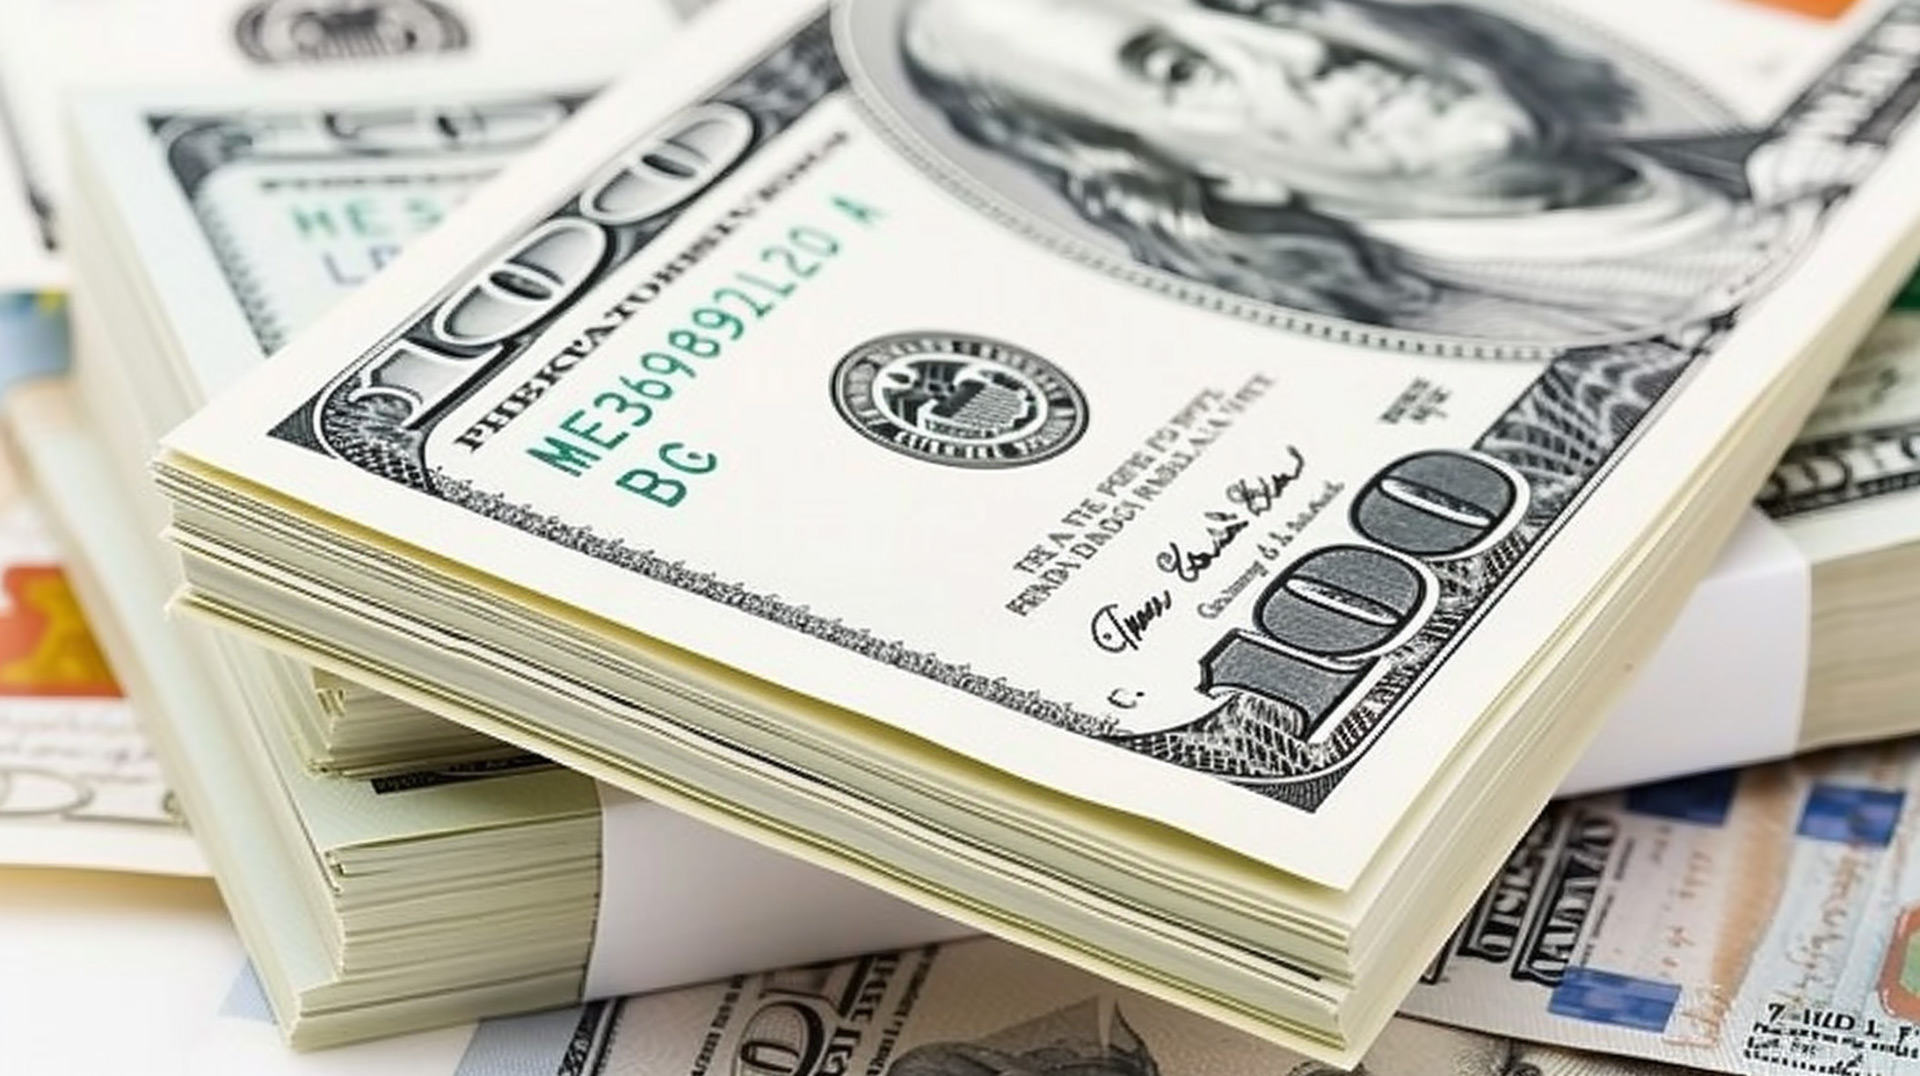 Currency Stock Photos: HD Quality Images